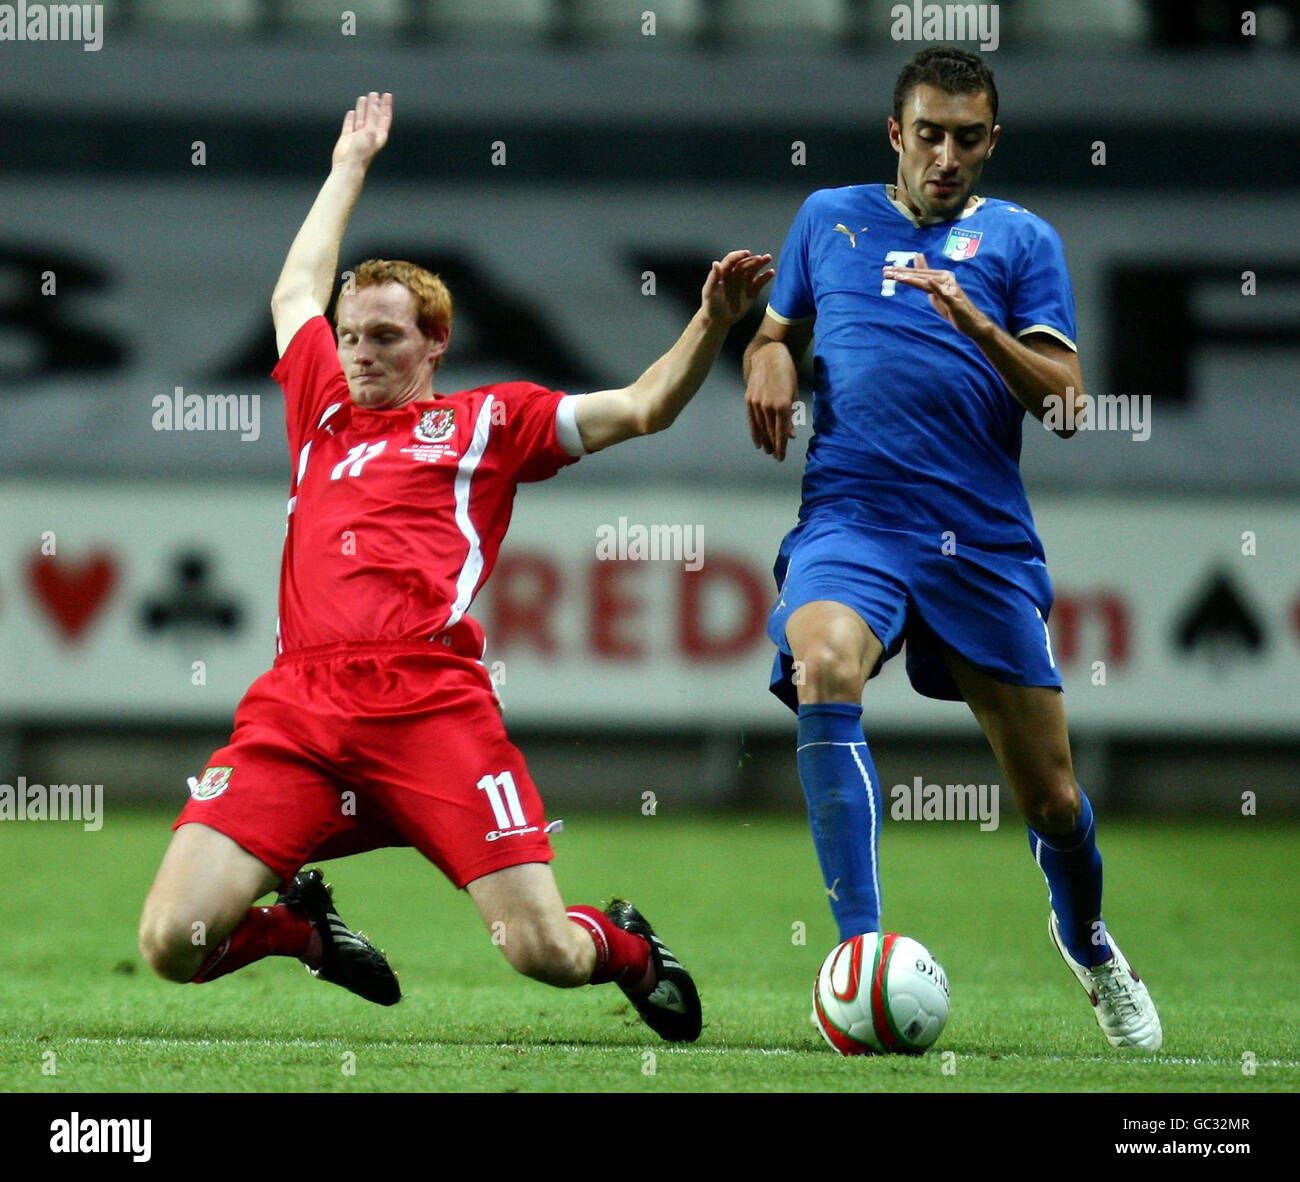 Wales' Shaun MacDonald (left) goes down under the challenge of Italy's Tommaso Bianchi during the UEFA Under 21 Qualifying match at the Liberty Stadium, Swansea . Stock Photo